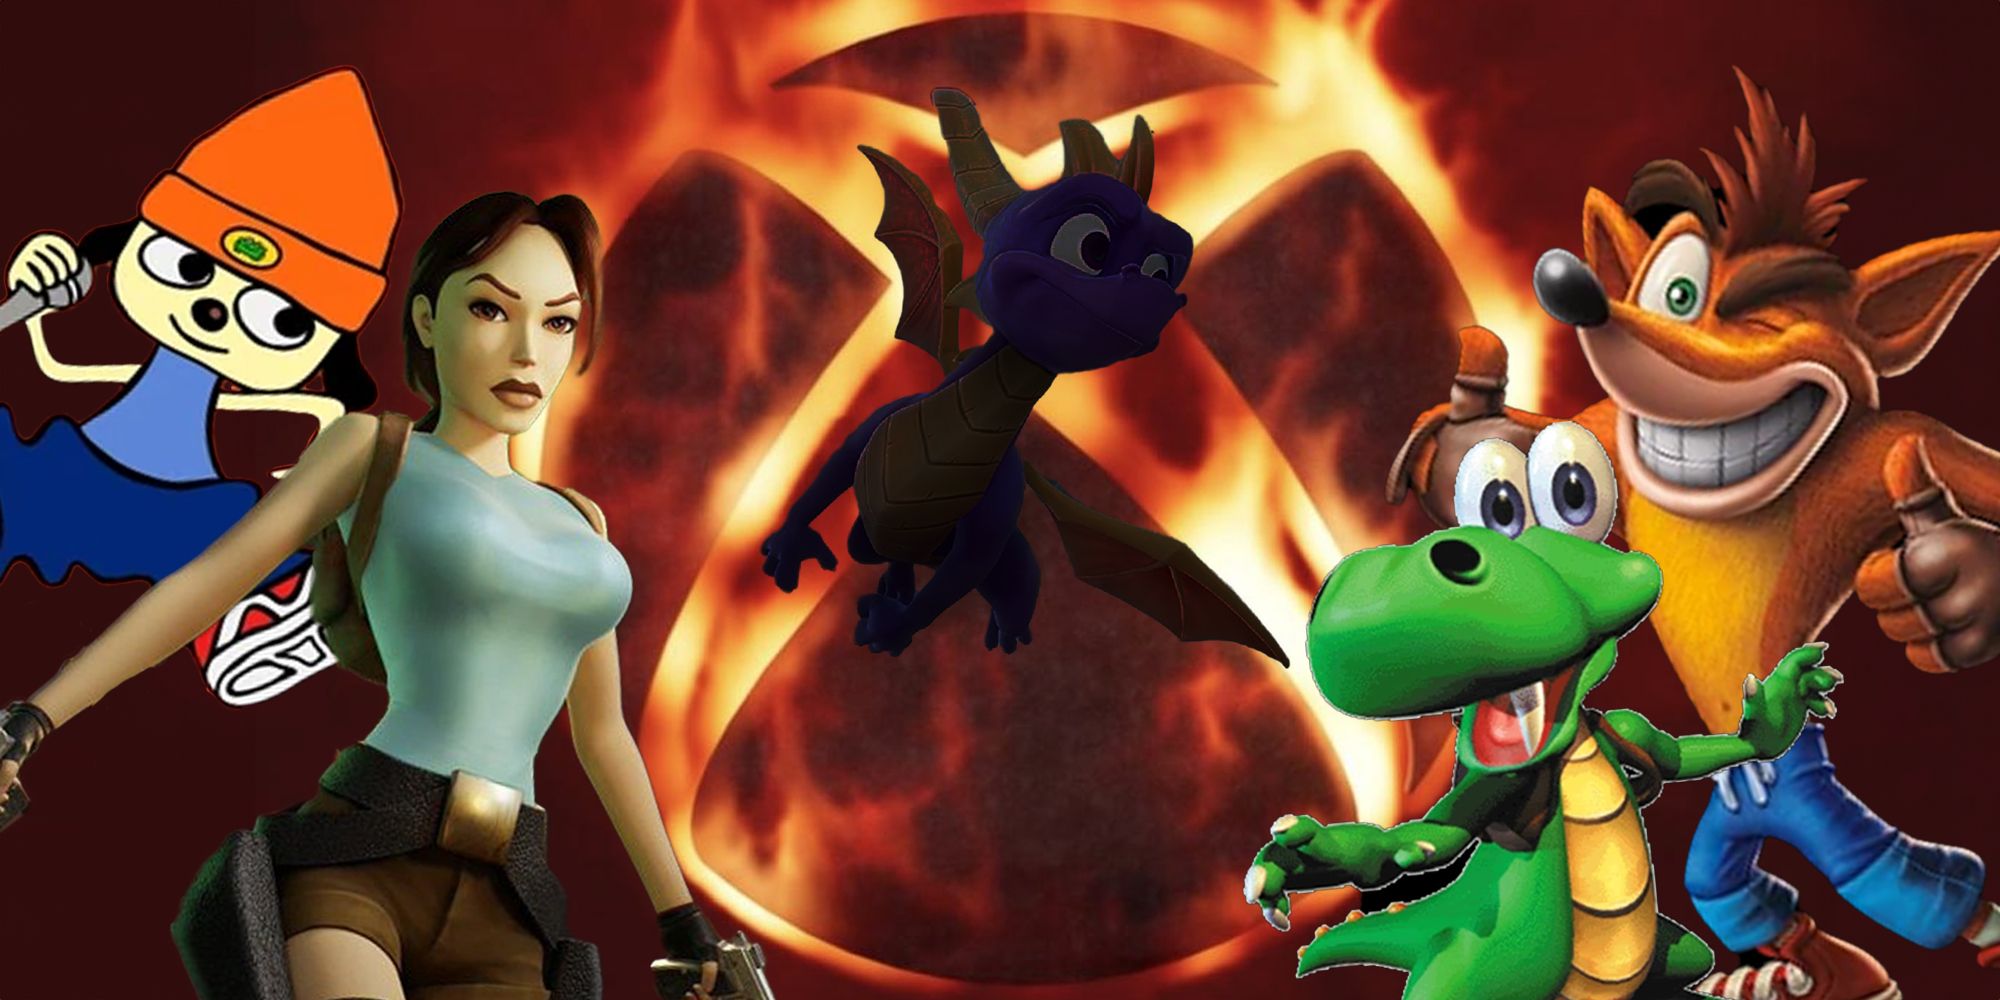 PlayStation 1 mascots Parappa the Rapper, Lara Croft, Croc and Crash Bandicoot with a silhouetted Spyro the dragon flying in front of a flaming Xbox logo